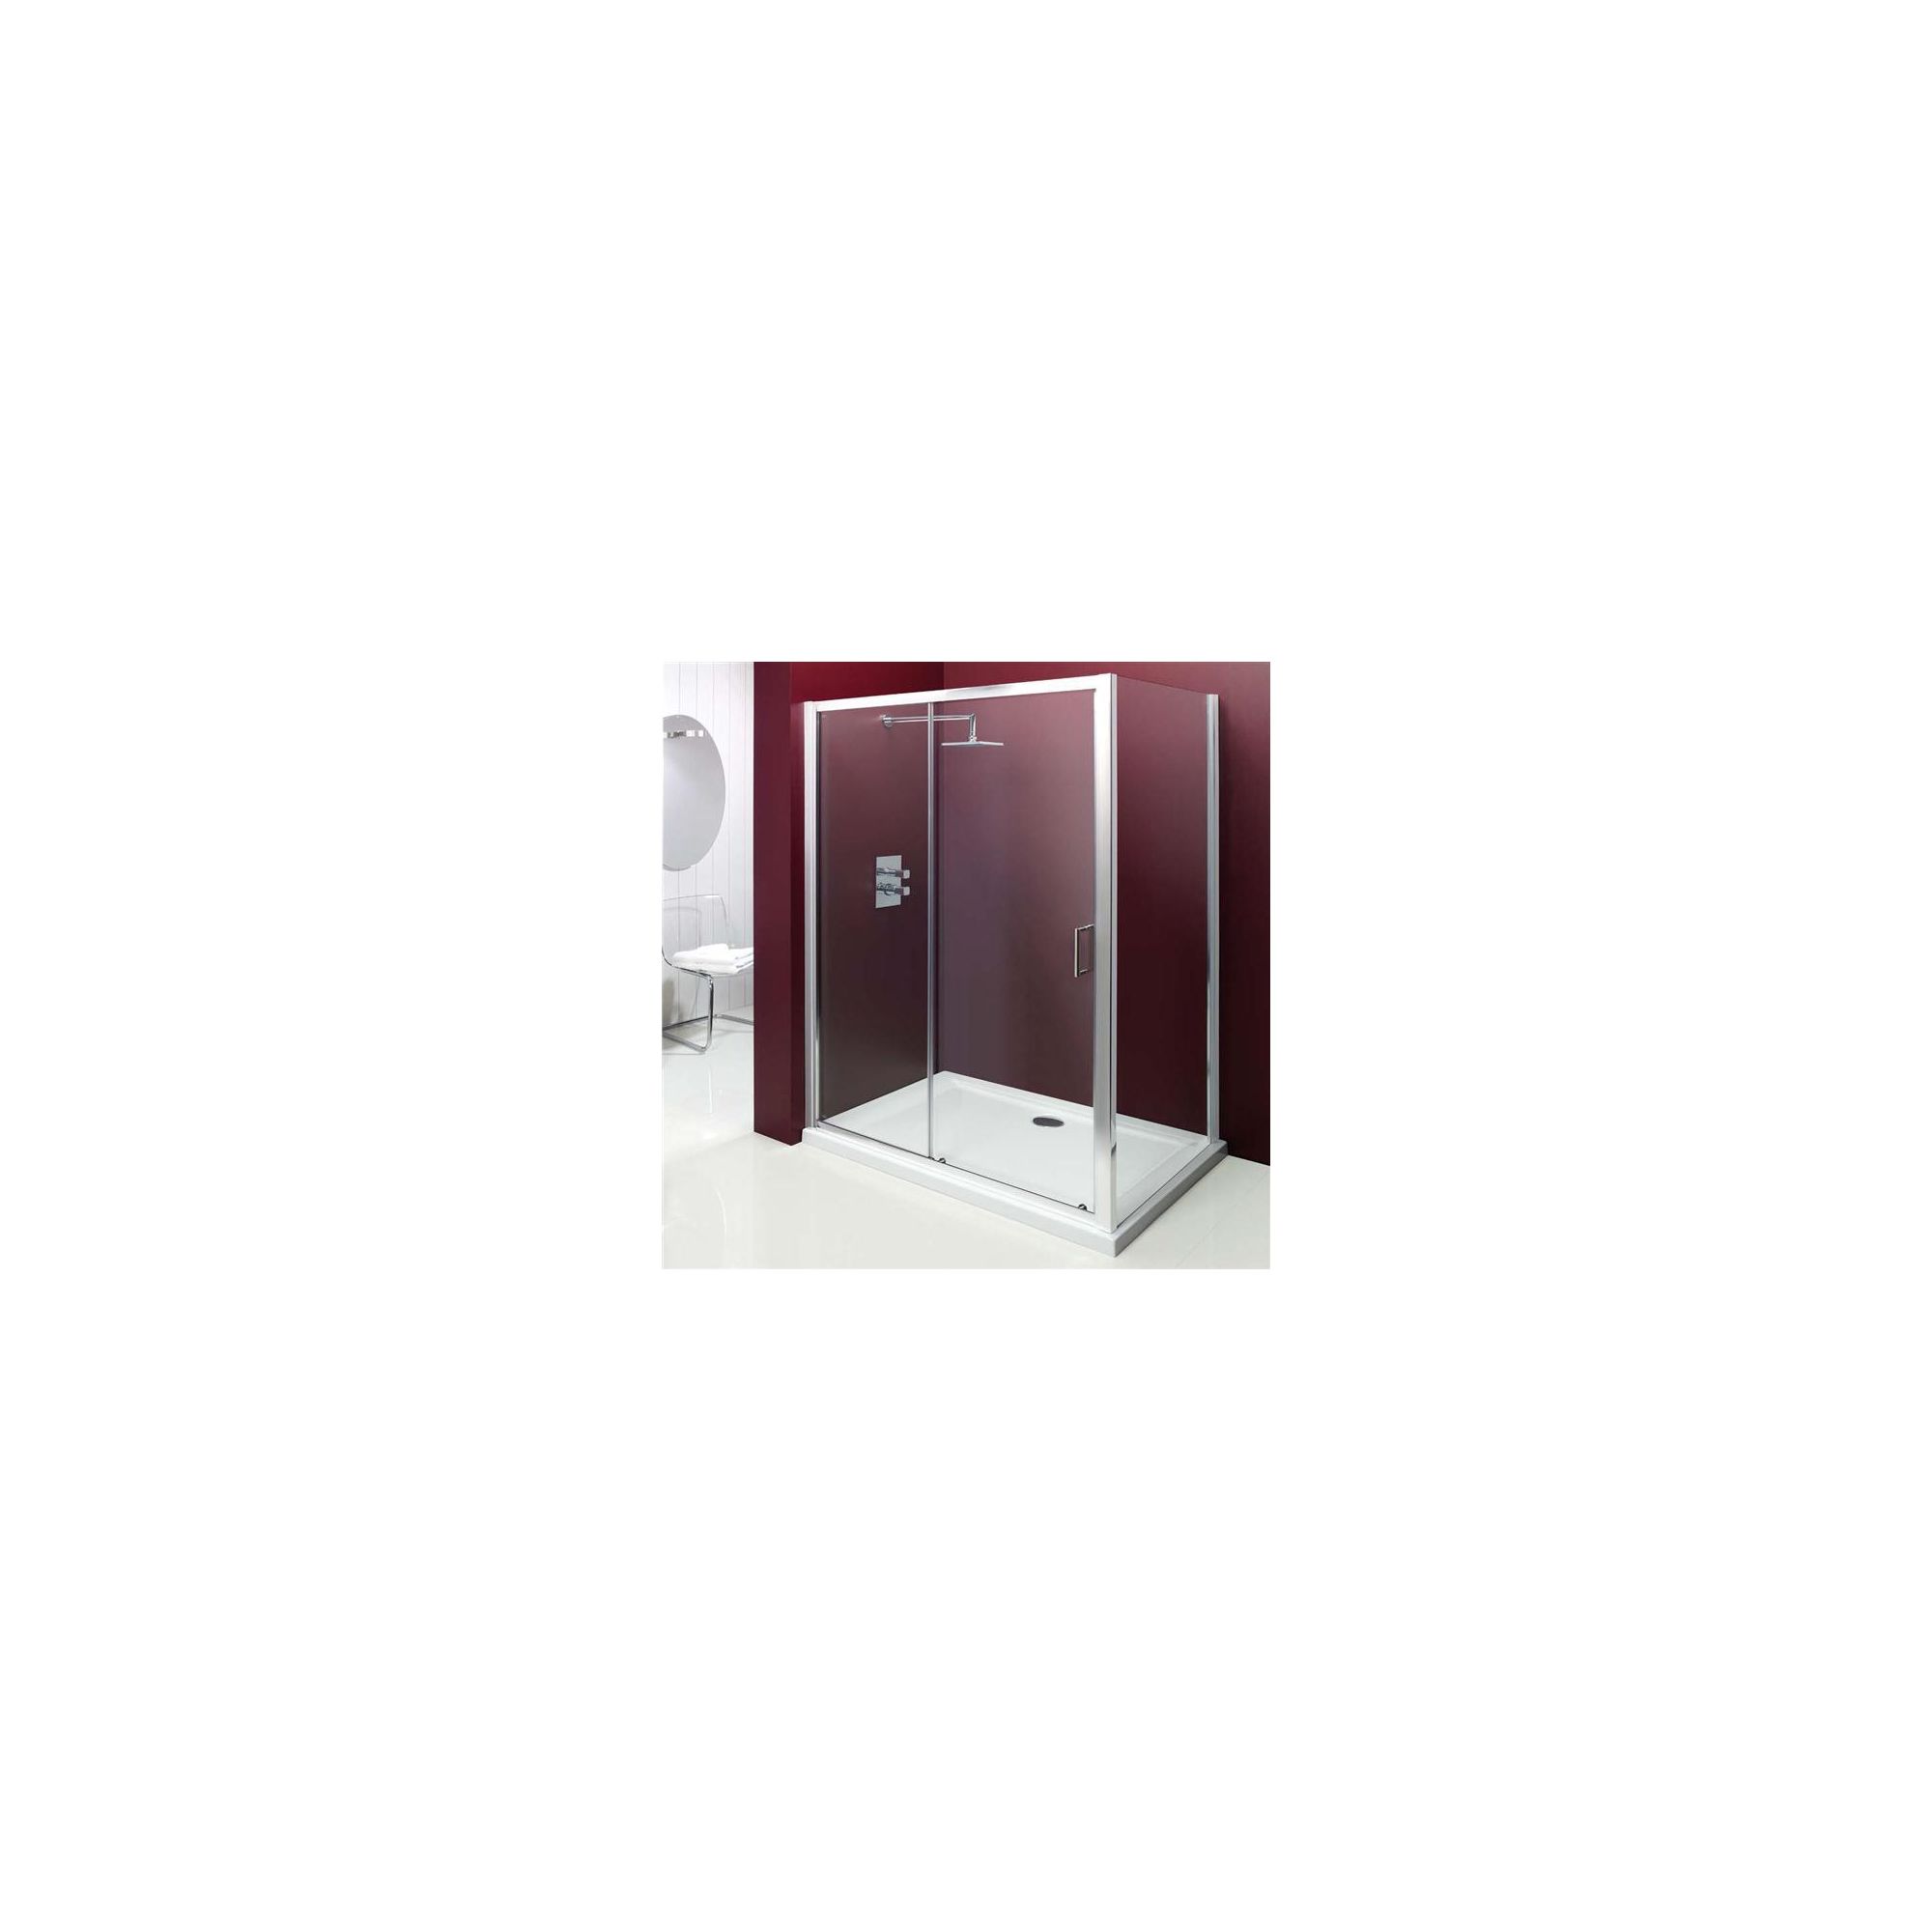 Merlyn Vivid Entree Sliding Door Shower Enclosure, 1000mm x 800mm, Low Profile Tray, 6mm Glass at Tesco Direct